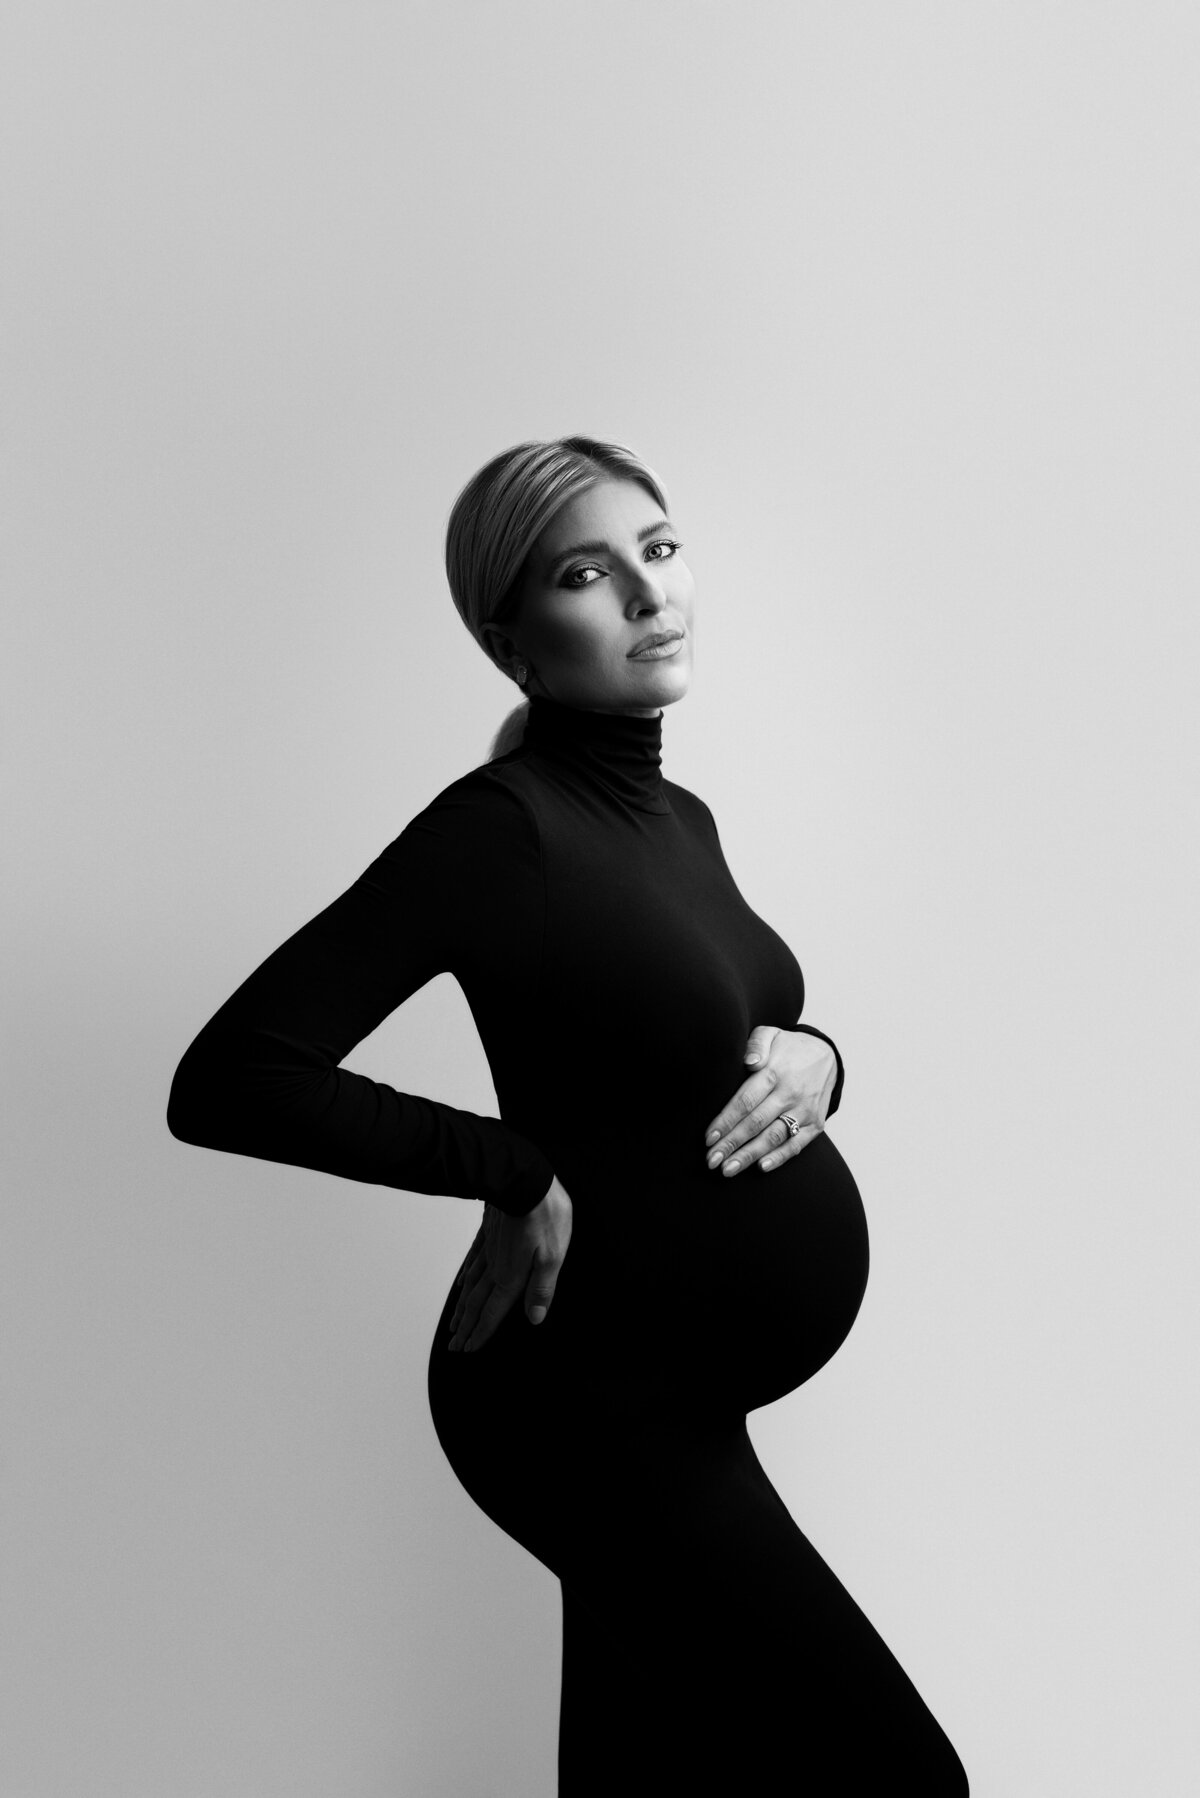 Woman poses for a fine art maternity photoshoot with Philadelphia Main Line's best maternity photographer Katie Marshall. Woman is standing side profile to the camera in a long, black body con dress.  Her forearm is resting on the small of her back, her back arm is resting atop of her baby bump. She is looking over her shoulder with a closed-mouth smile. Her hair is tied back in a low ponytail.